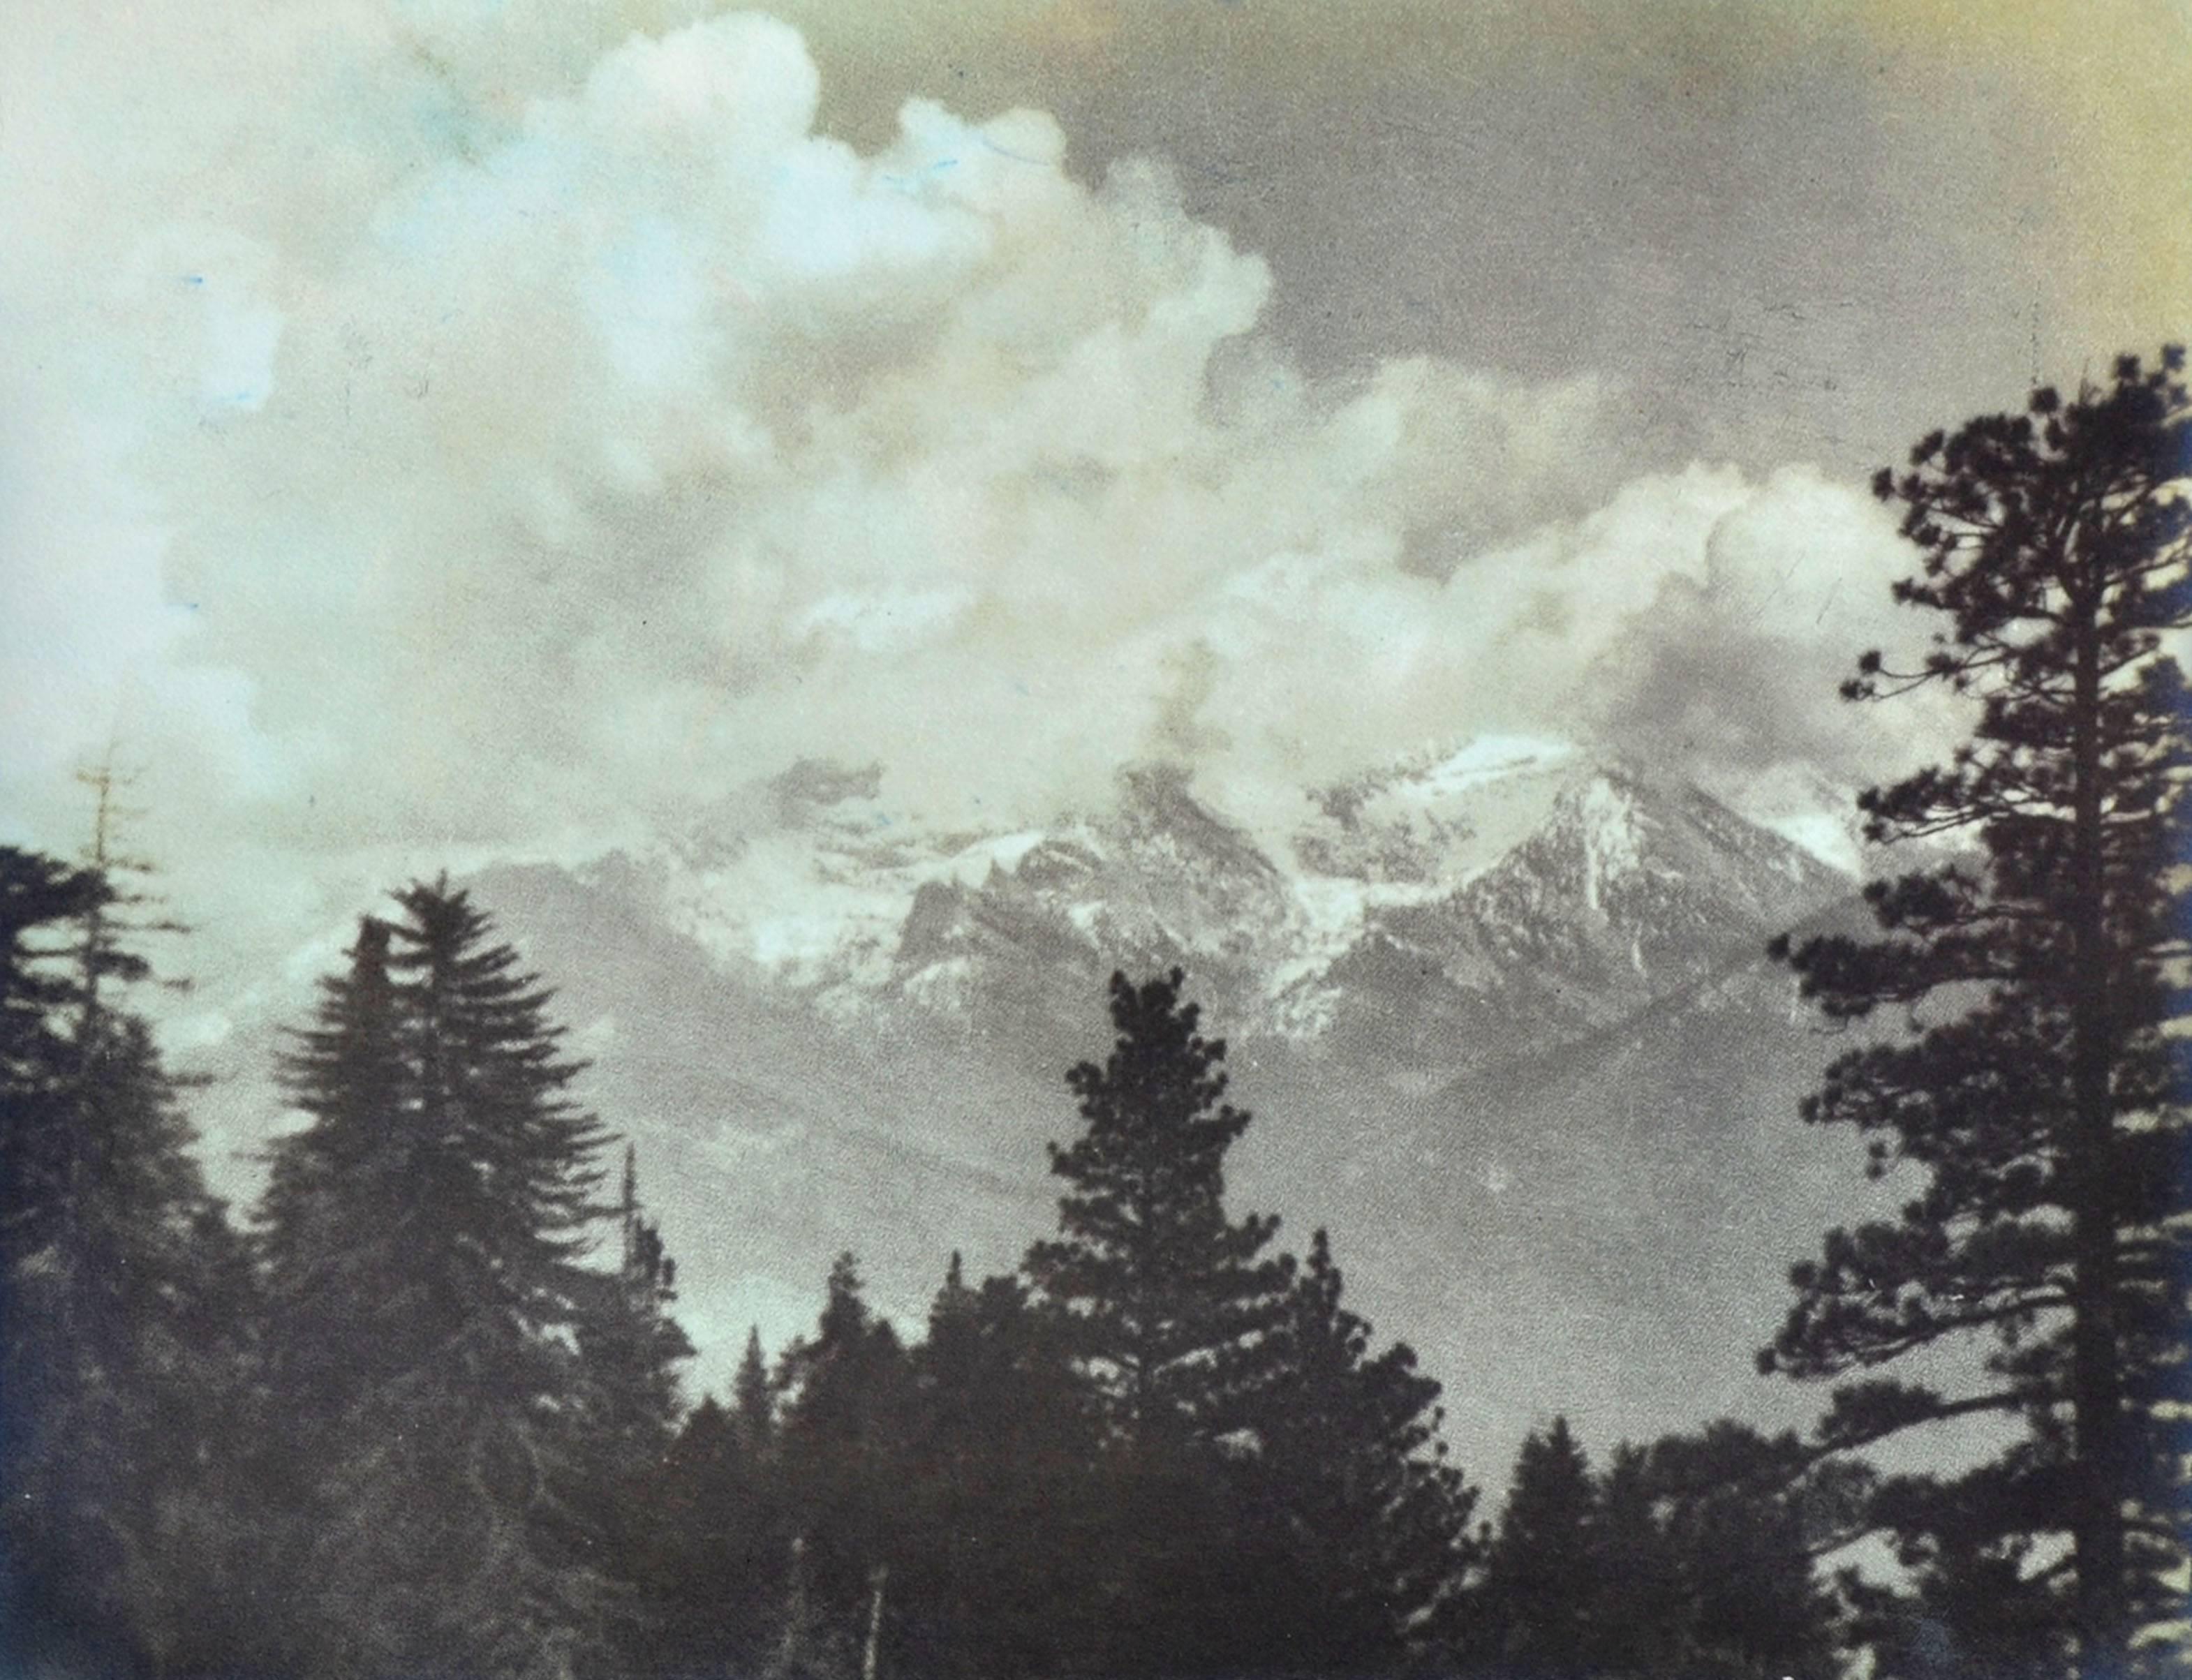 Sigismund Blumann Landscape Photograph - Early 20th Century Photograph -- "Impressions of the High Sierras"